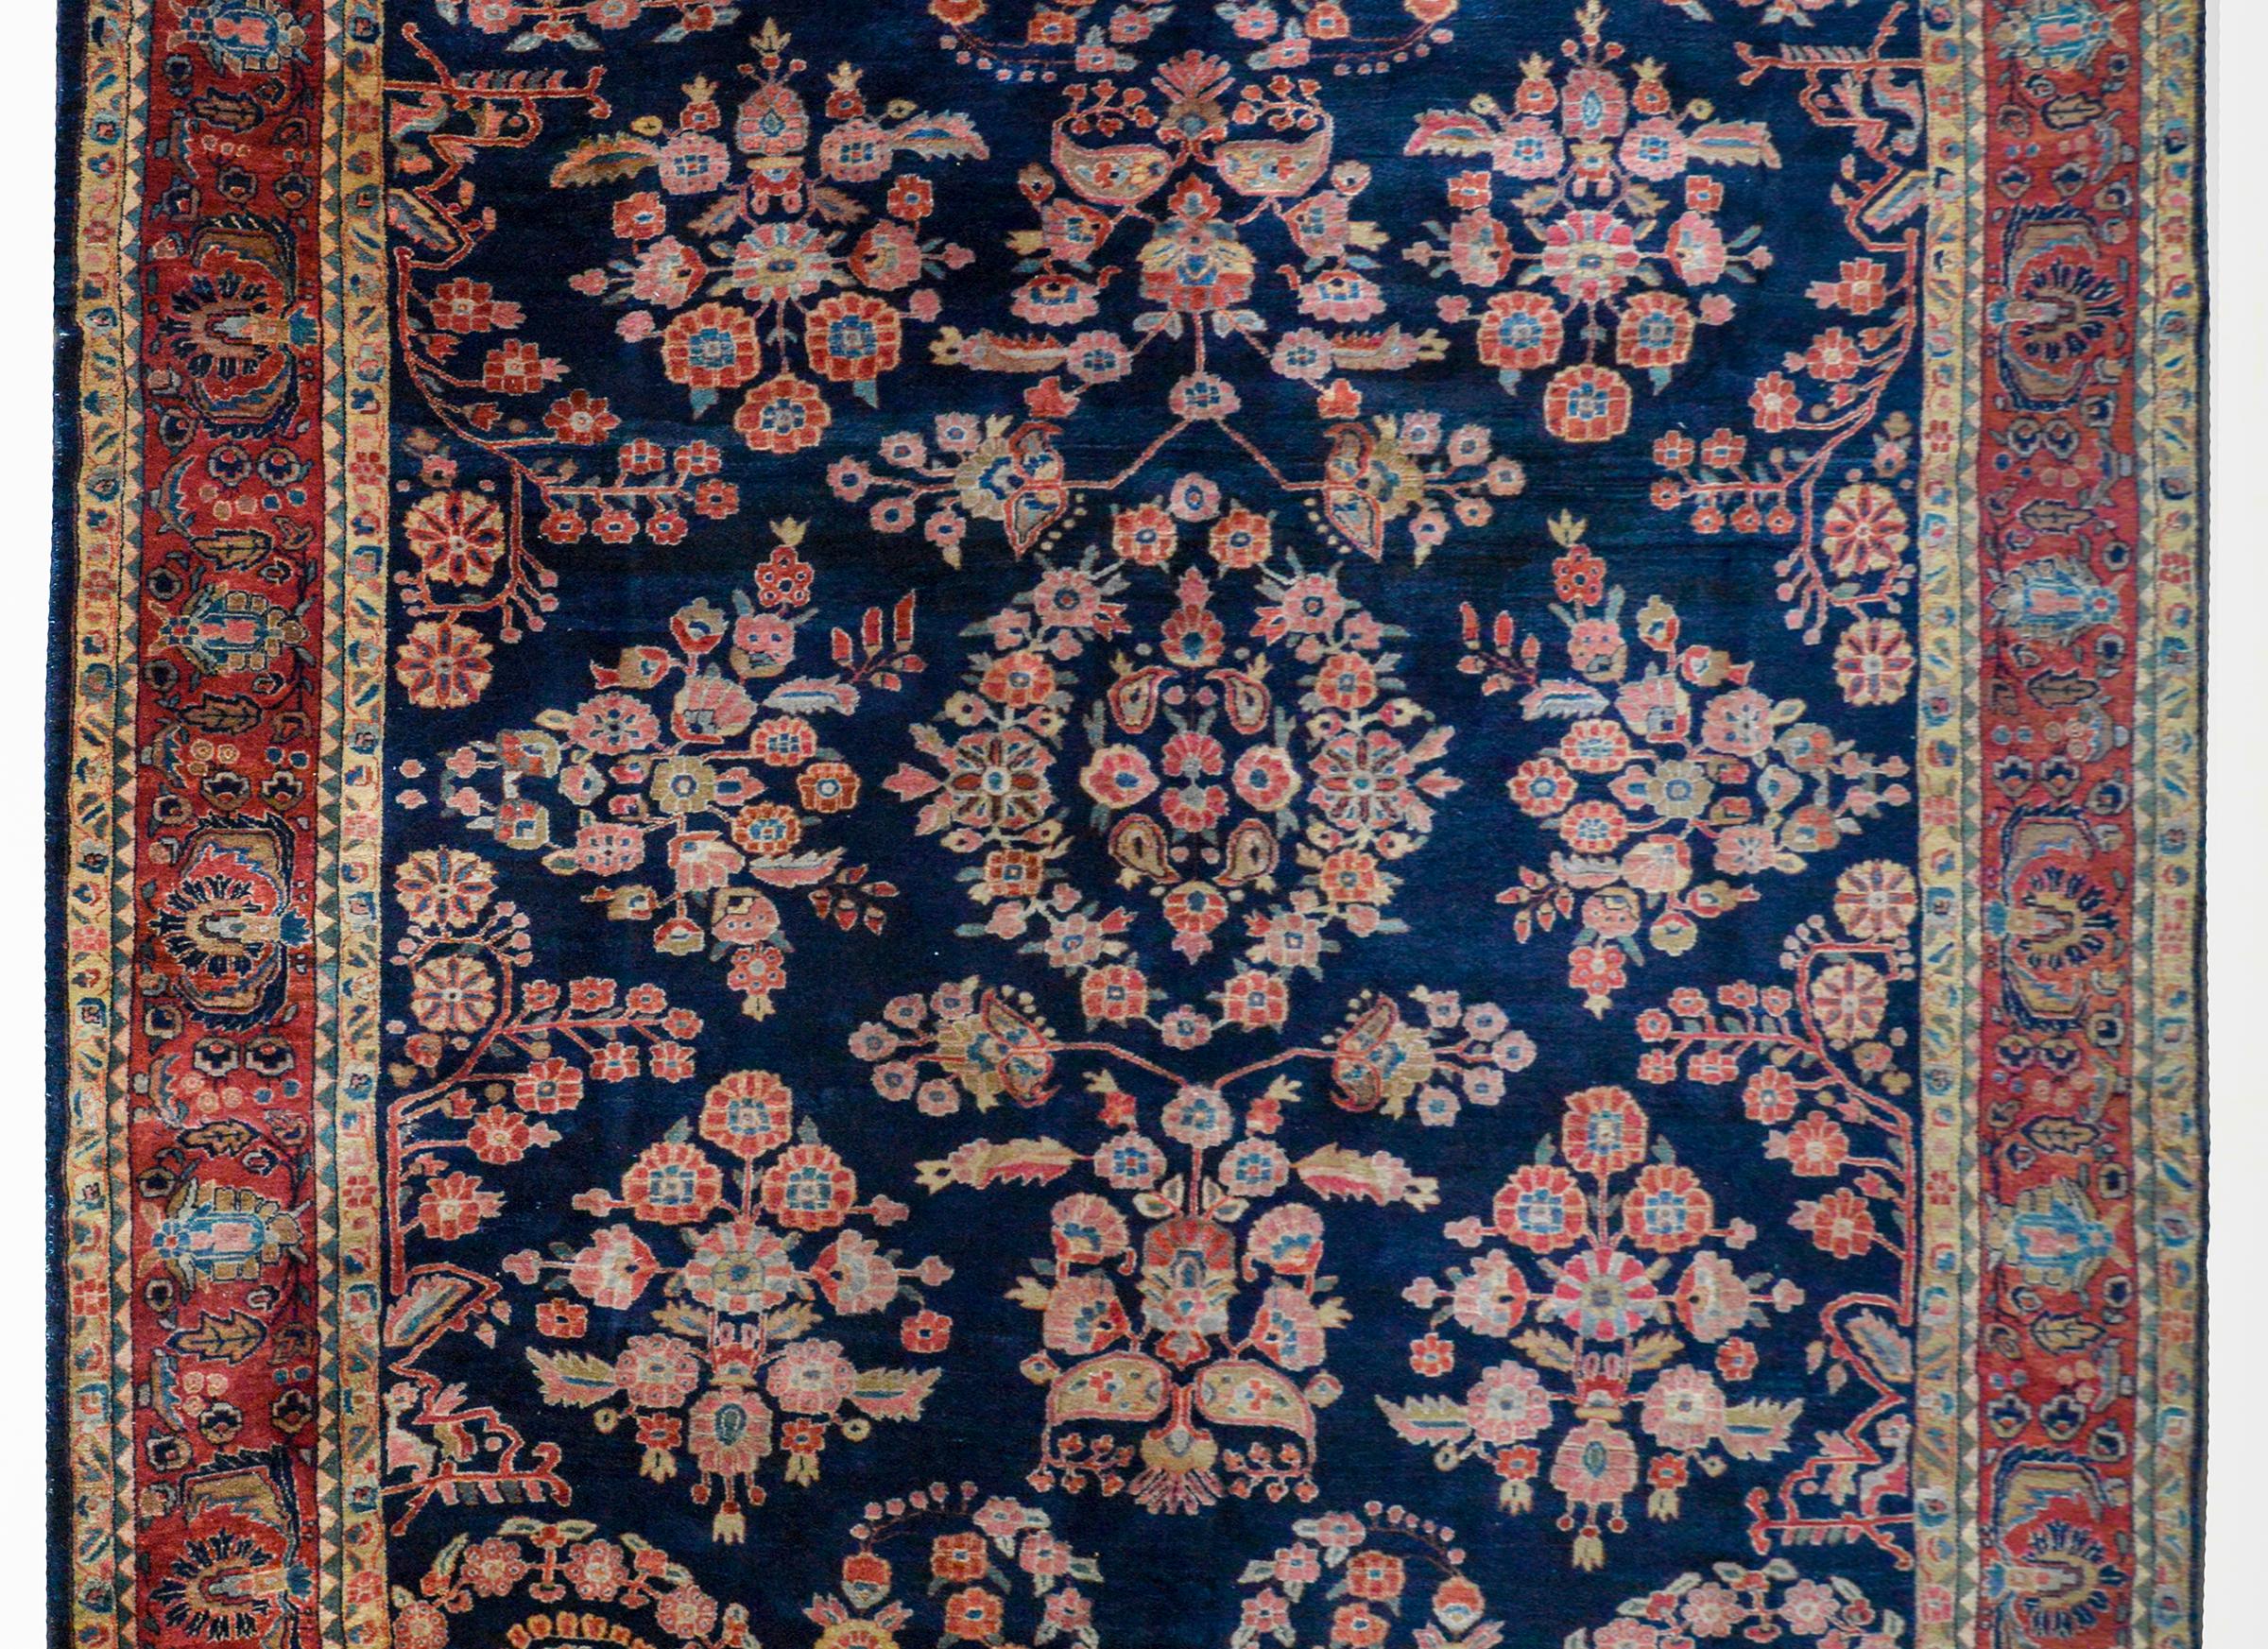 A wonderful early 20th century Persian Sarouk Mohajeran rug with a beautiful all-over mirrored floral pattern woven in traditional Sarouk colors of light and dark indigo, crimson, cream, and pink. The border is outstanding with a wide central floral